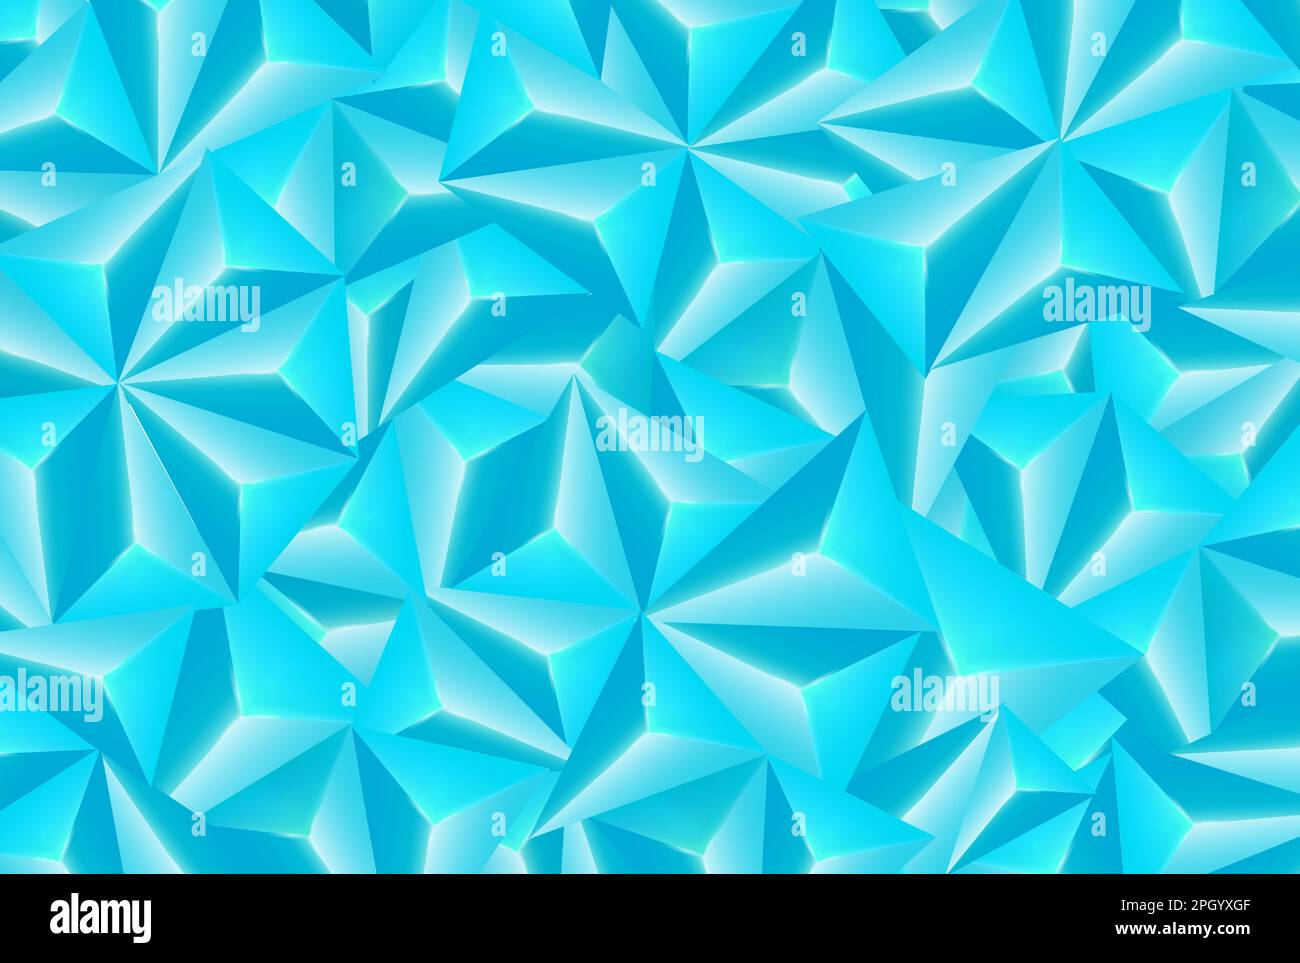 Textured light blue polygon background. Can be used for background Stock Vector